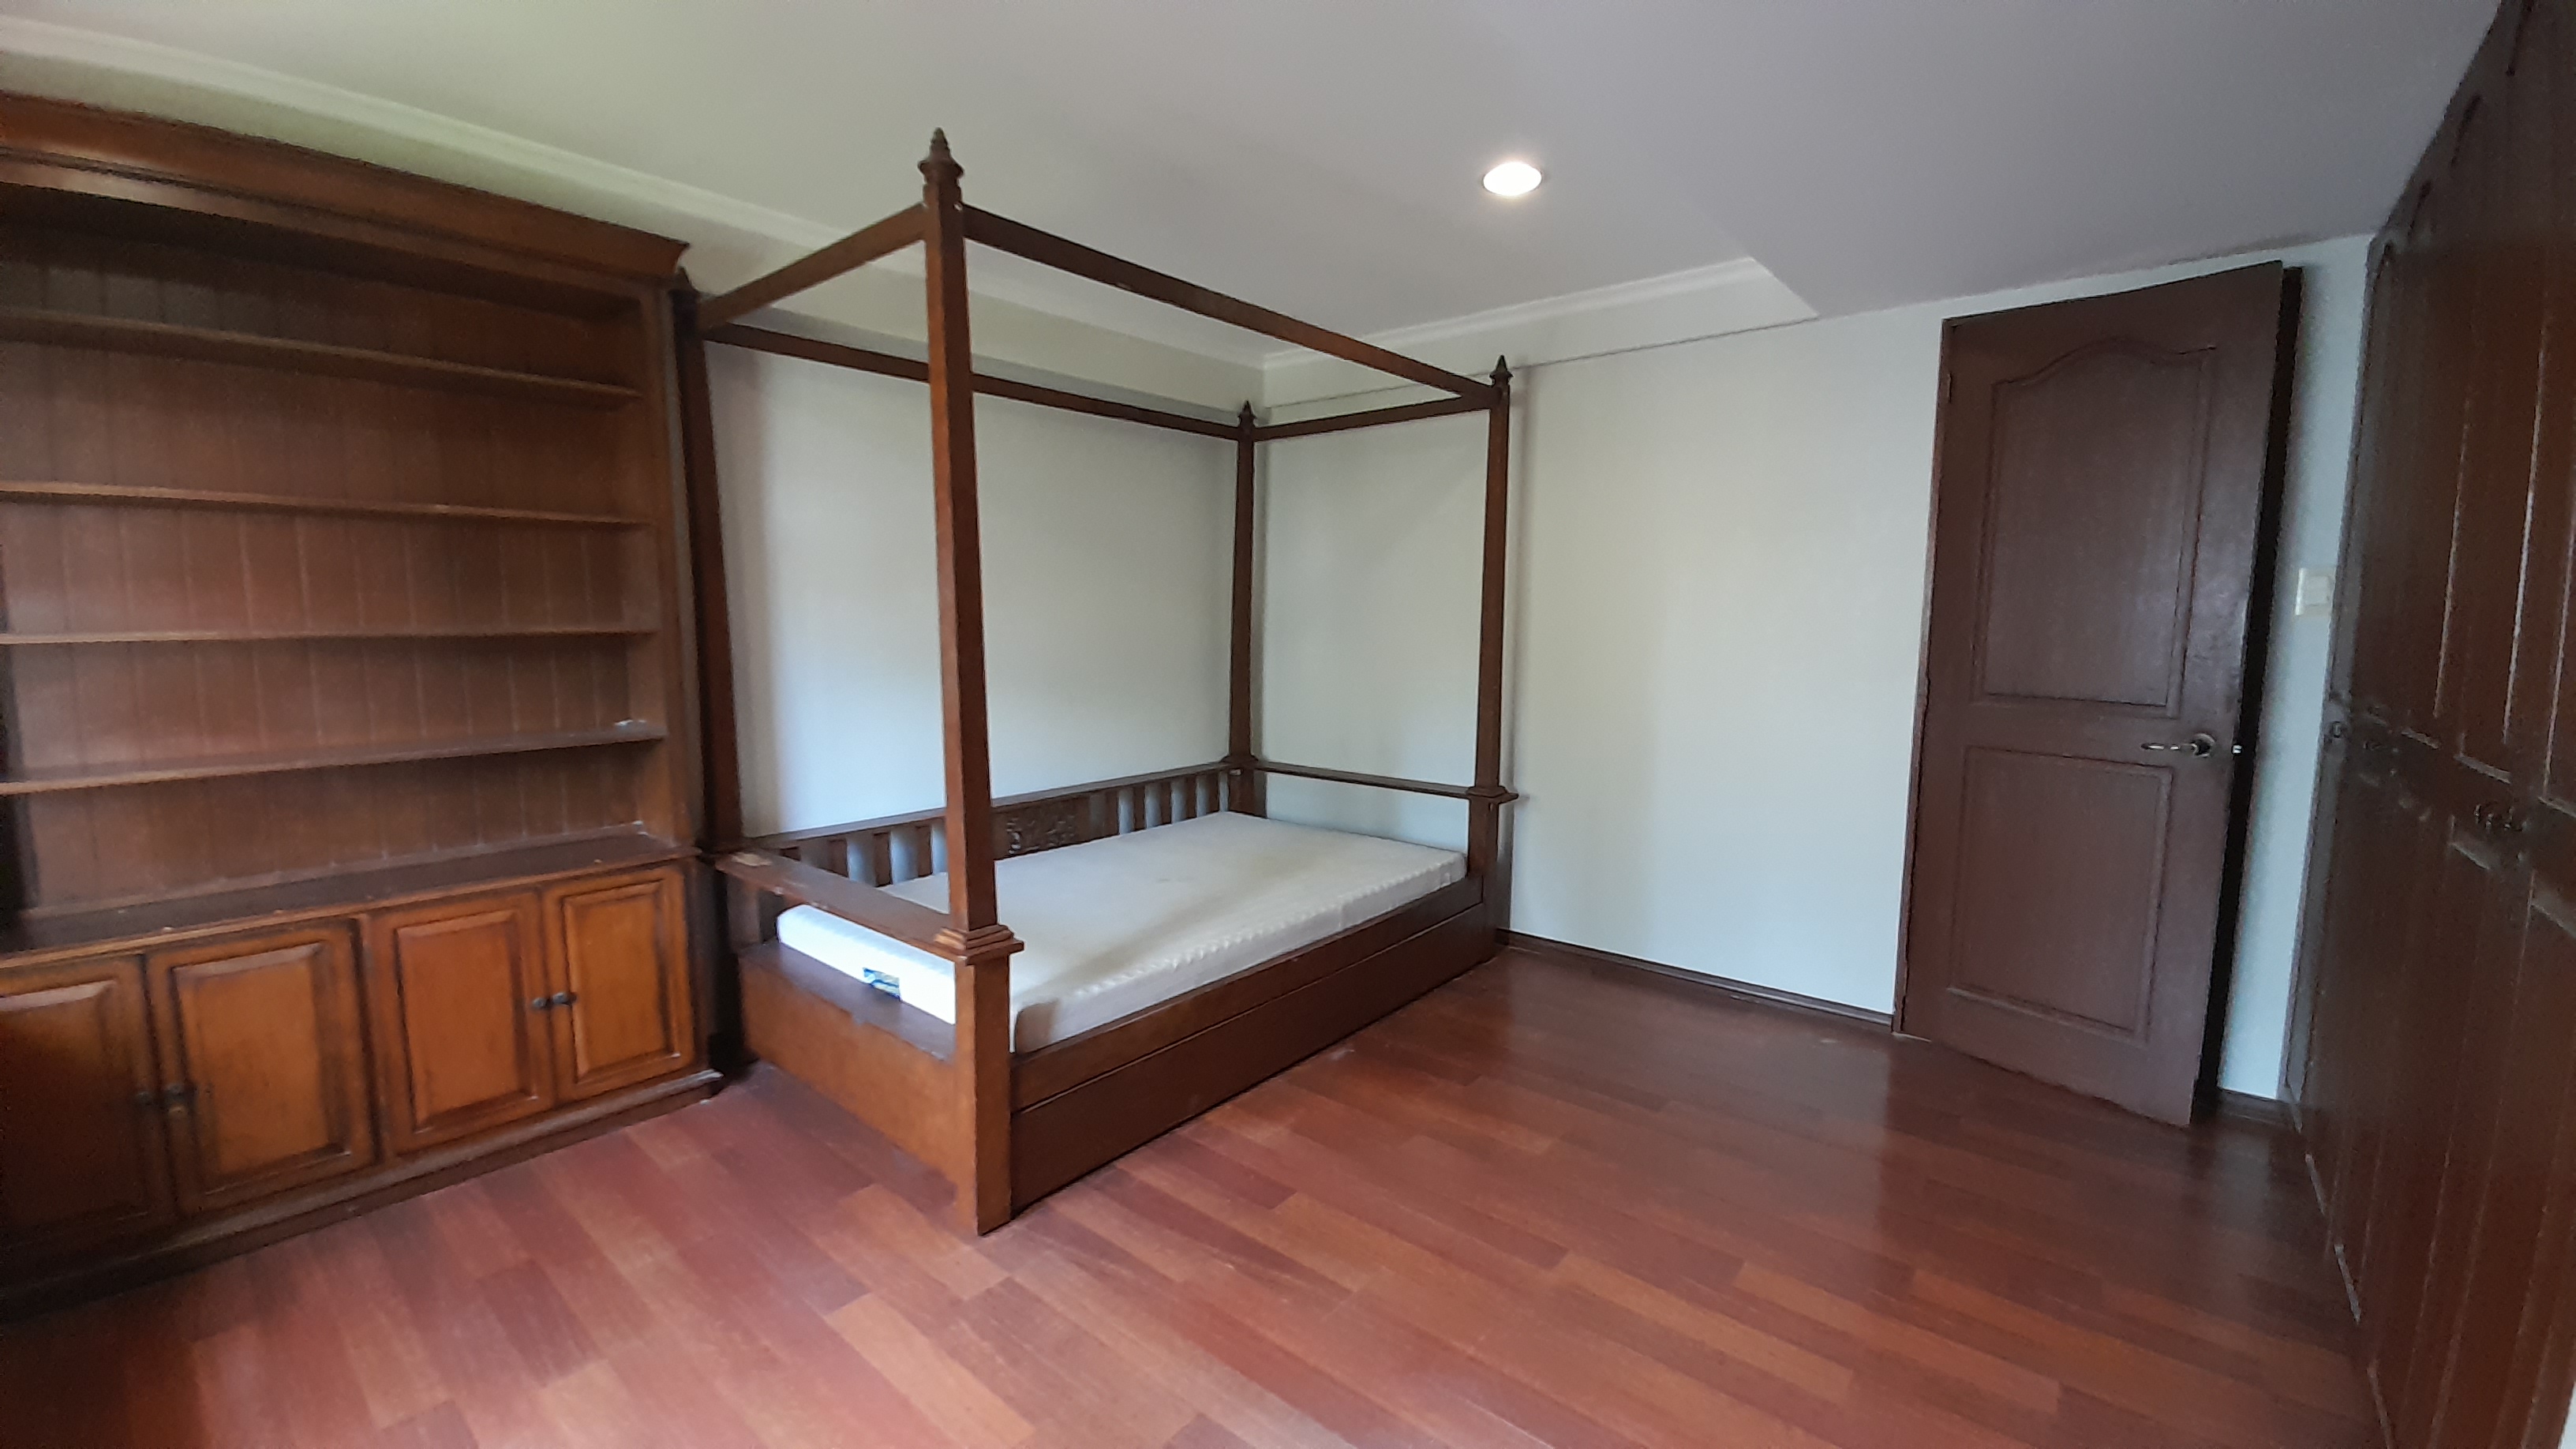 furnished-house-with-3-spacious-bedroom-located-in-talamban-cebu-city